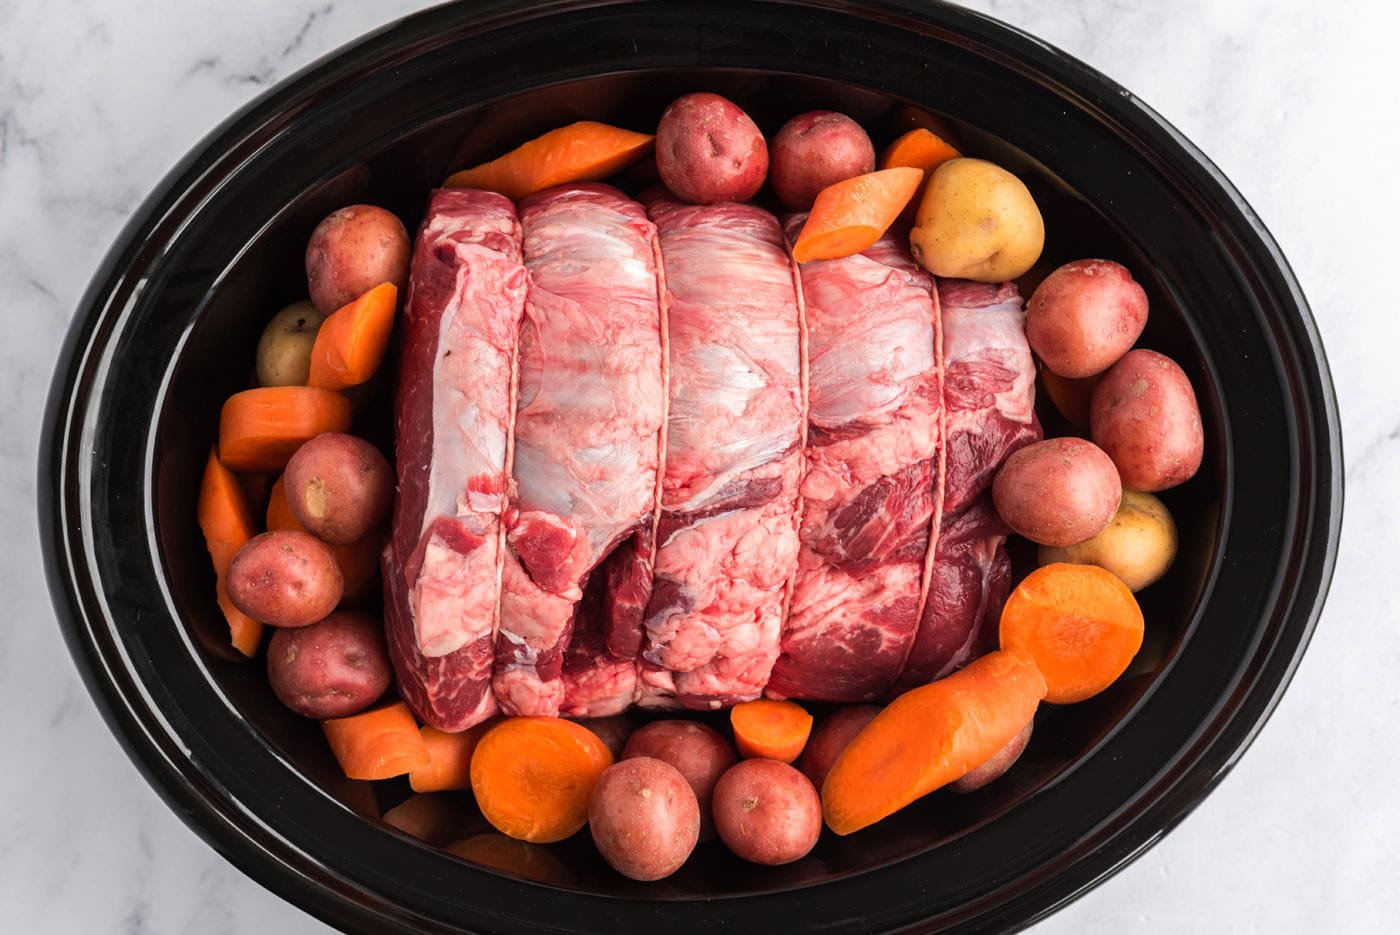 beef roast in crockpot surrounded by carrots and potatoes